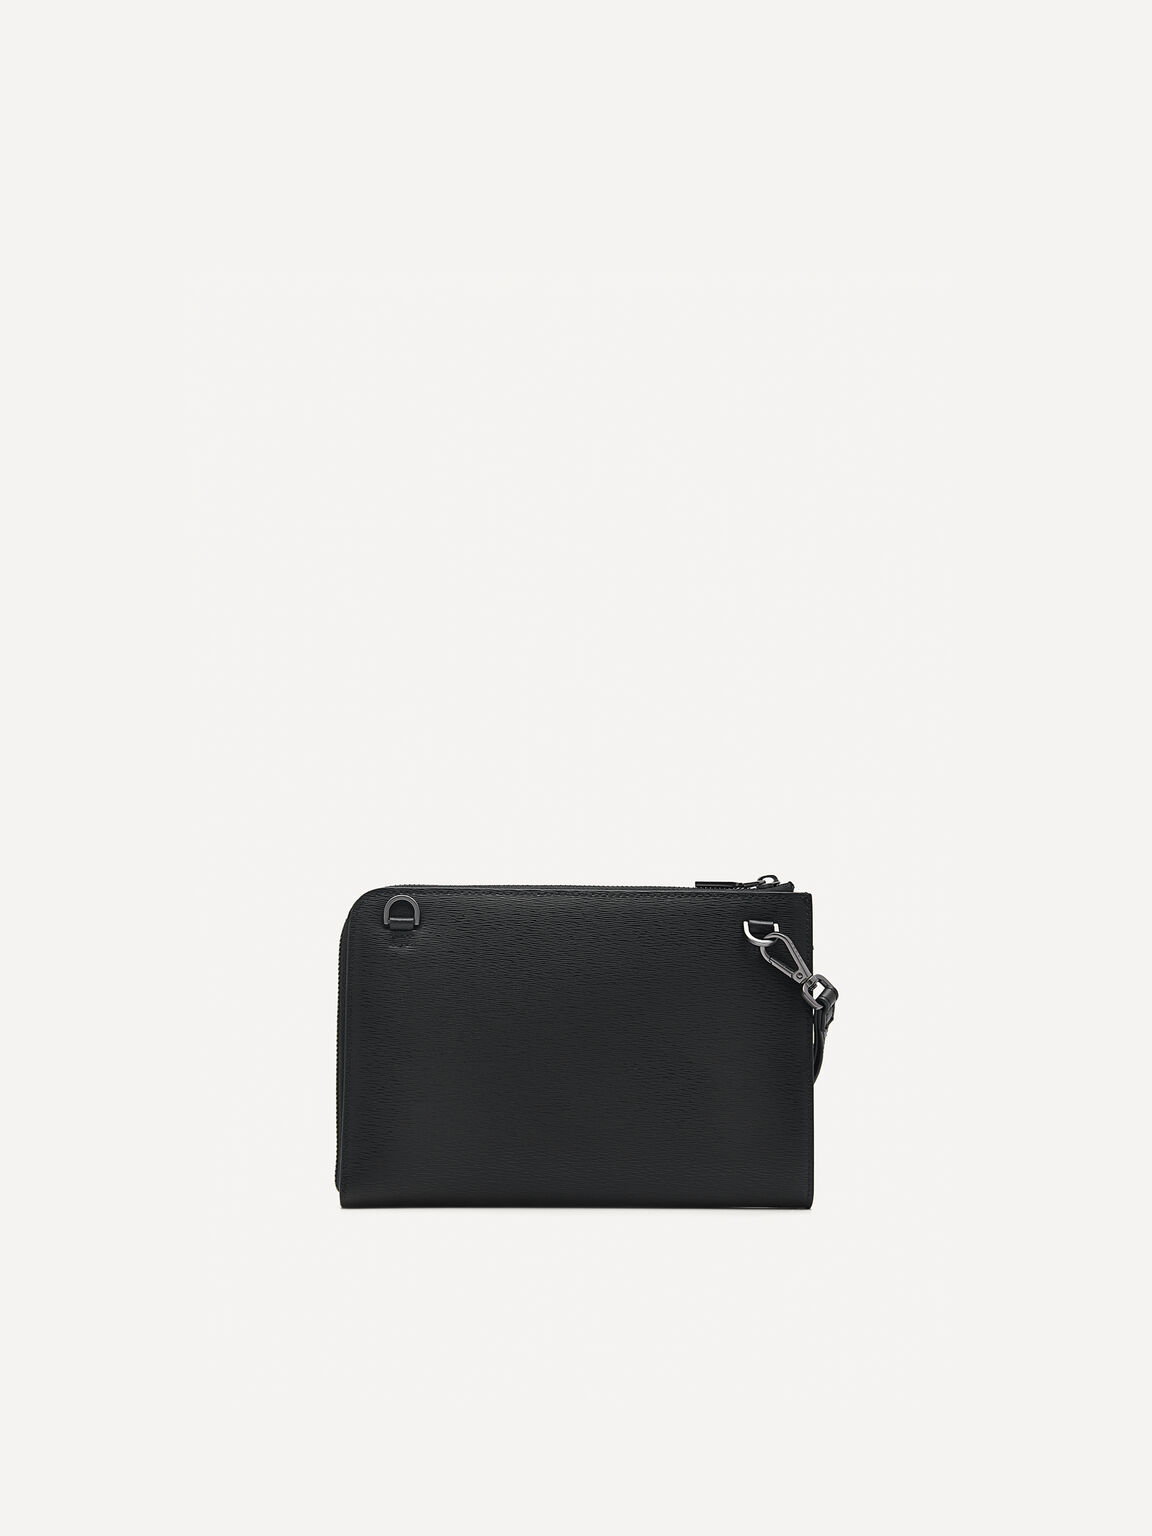 Small Leather Clutch Bag, Black